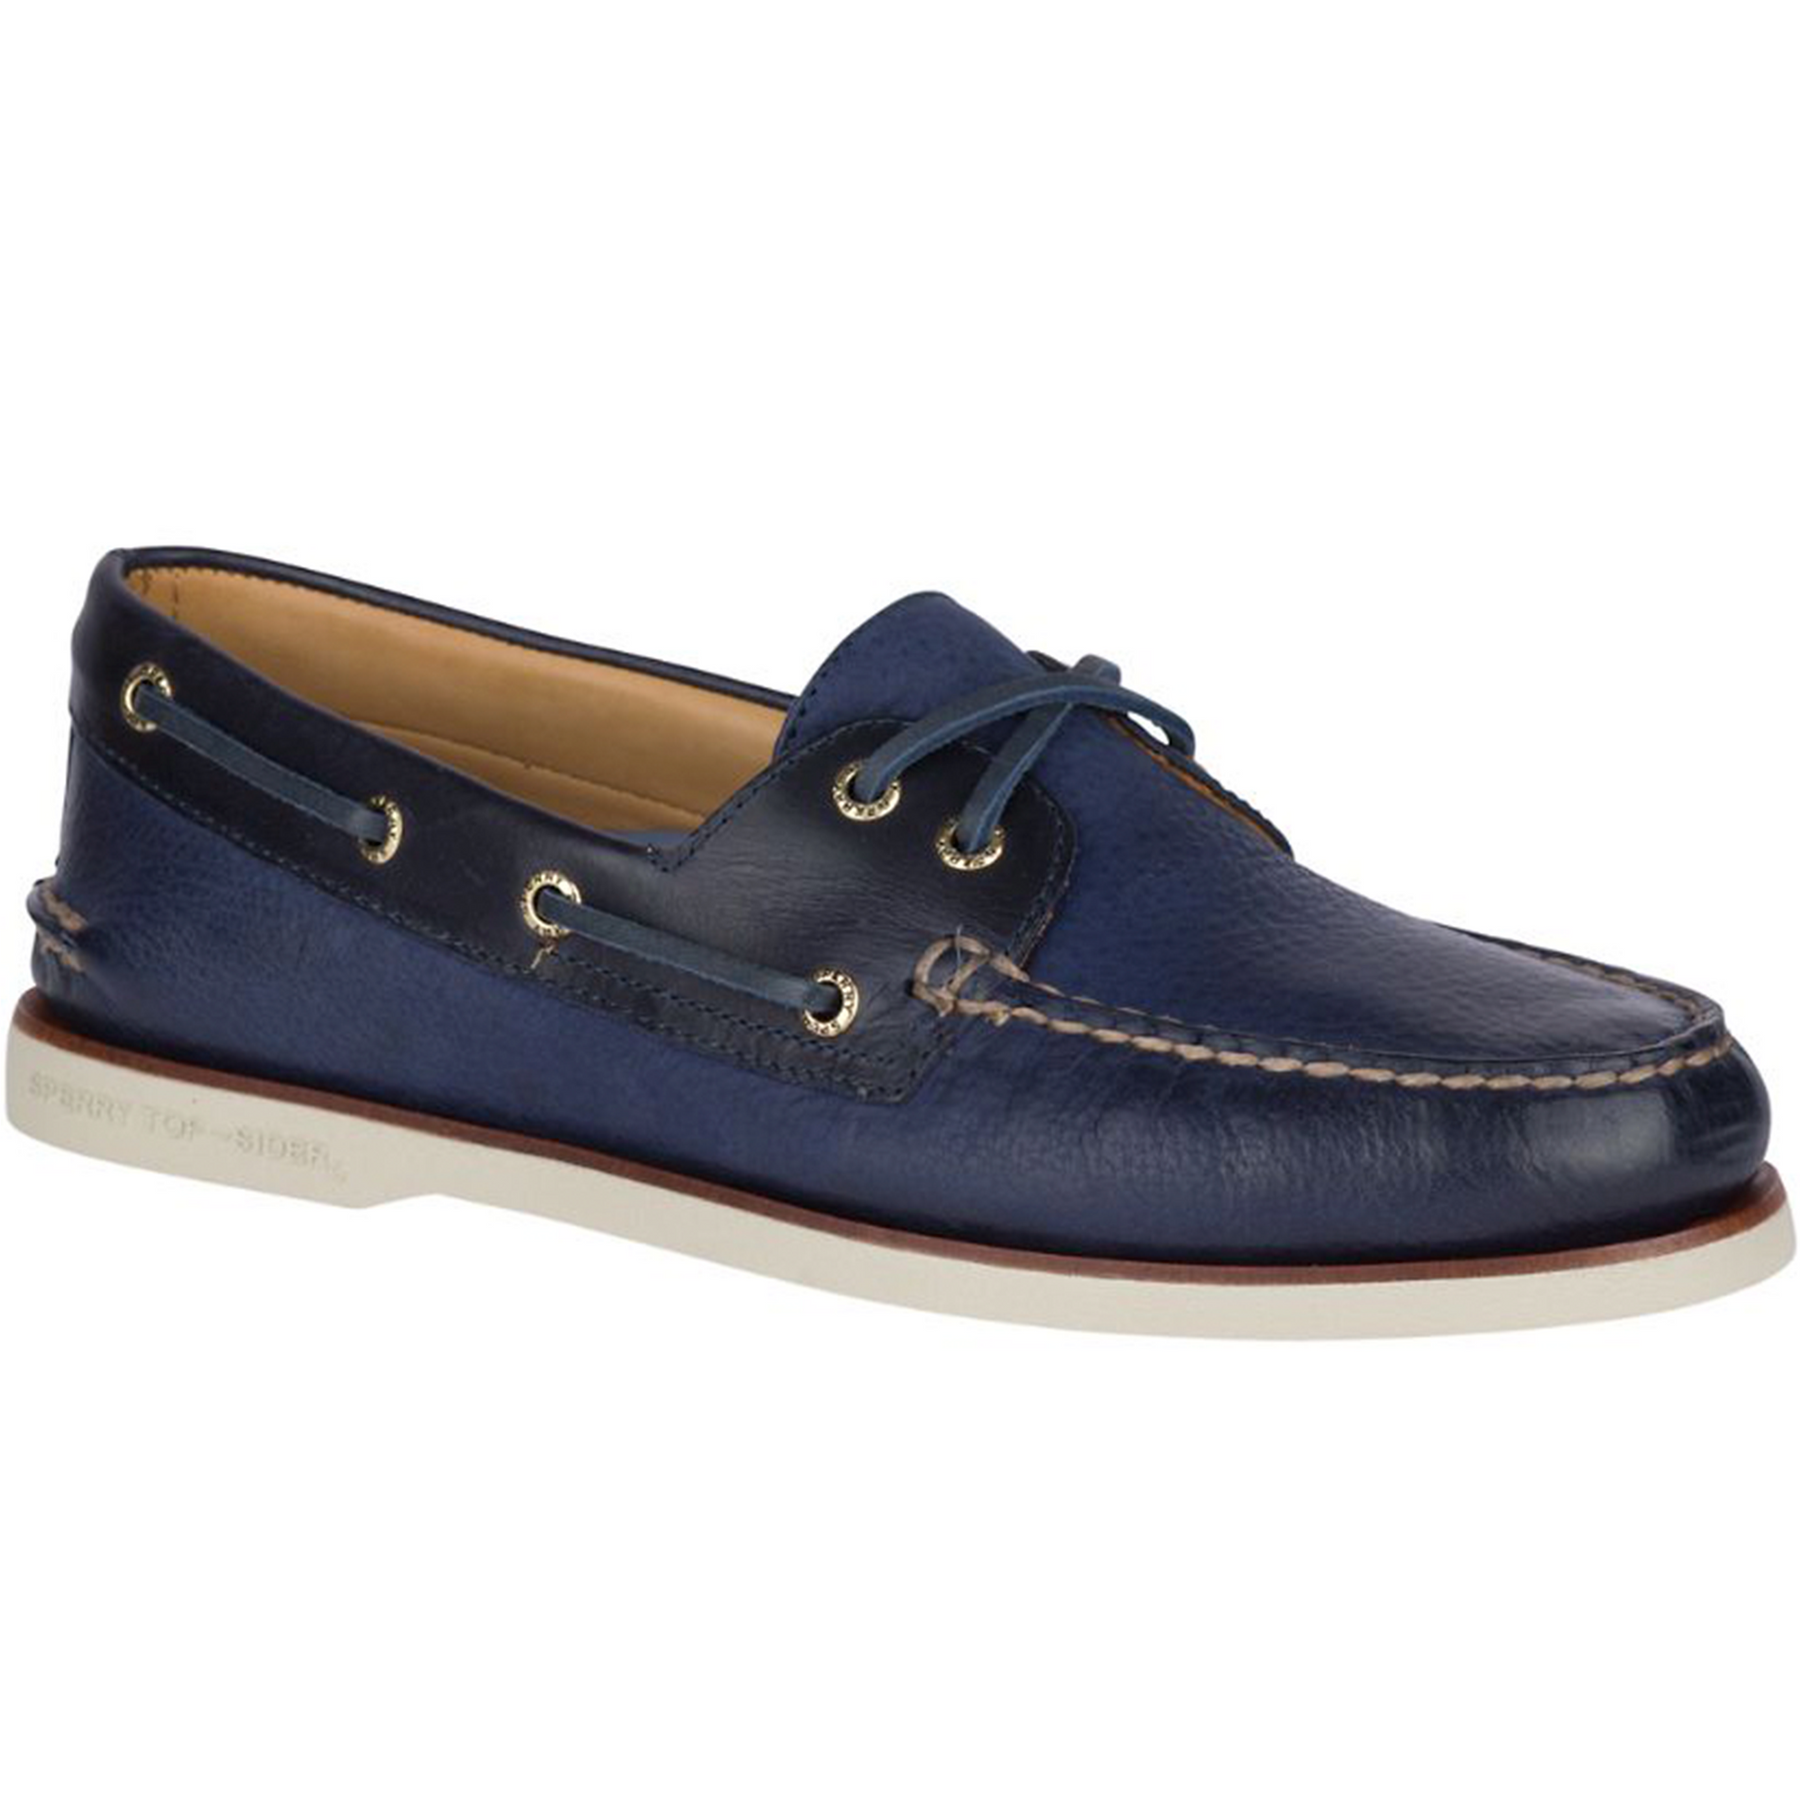 Men's Gold Cup Authentic Original Rivingston Navy Boat Shoes (STS19320)